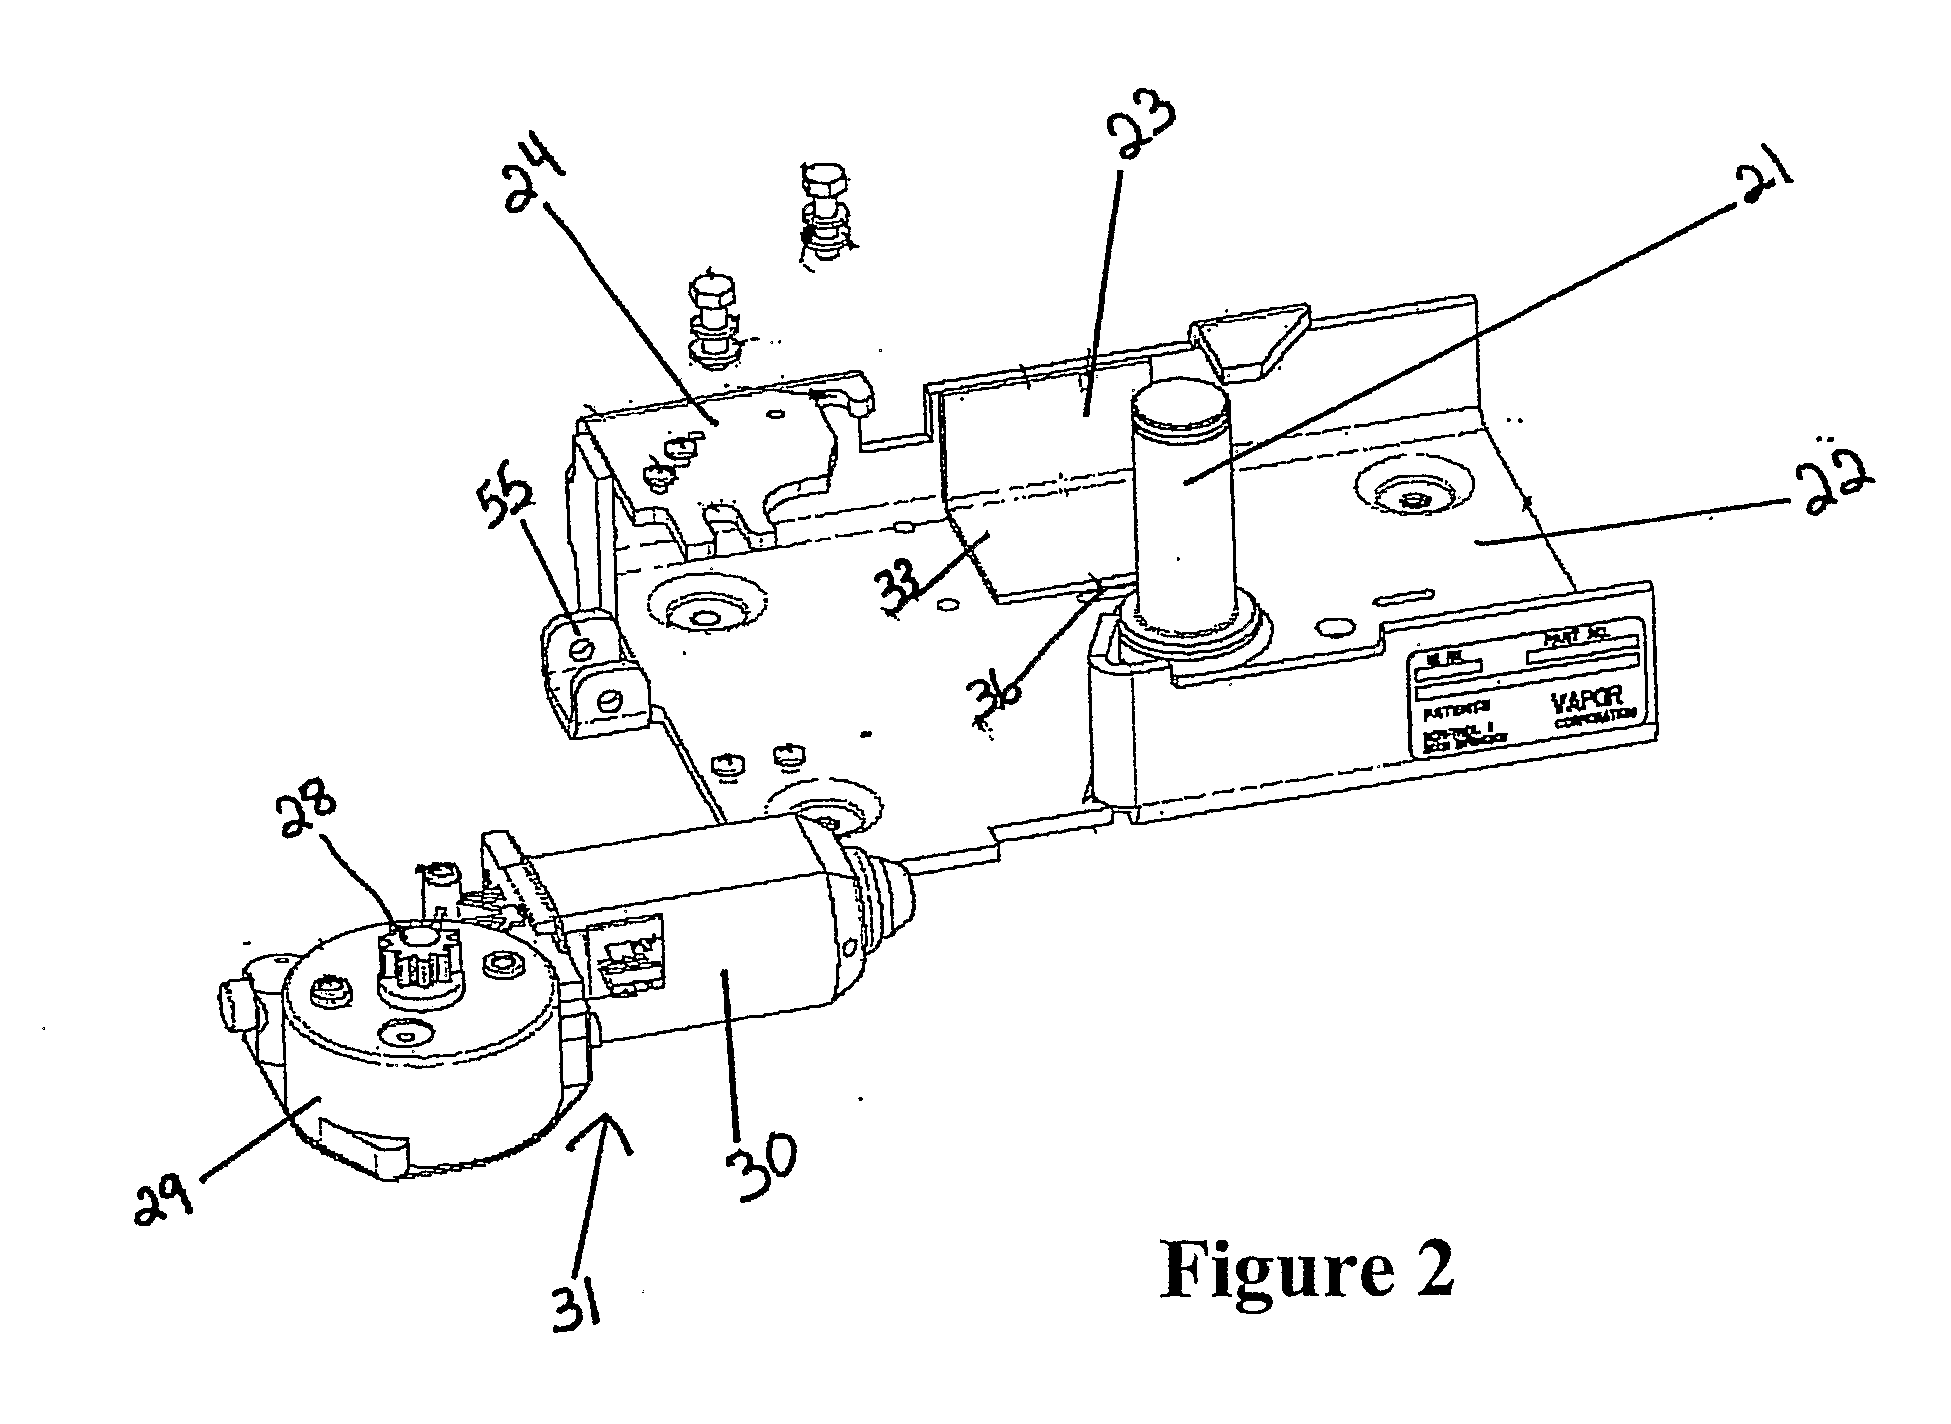 Electrically Driven Entryway Actuation System